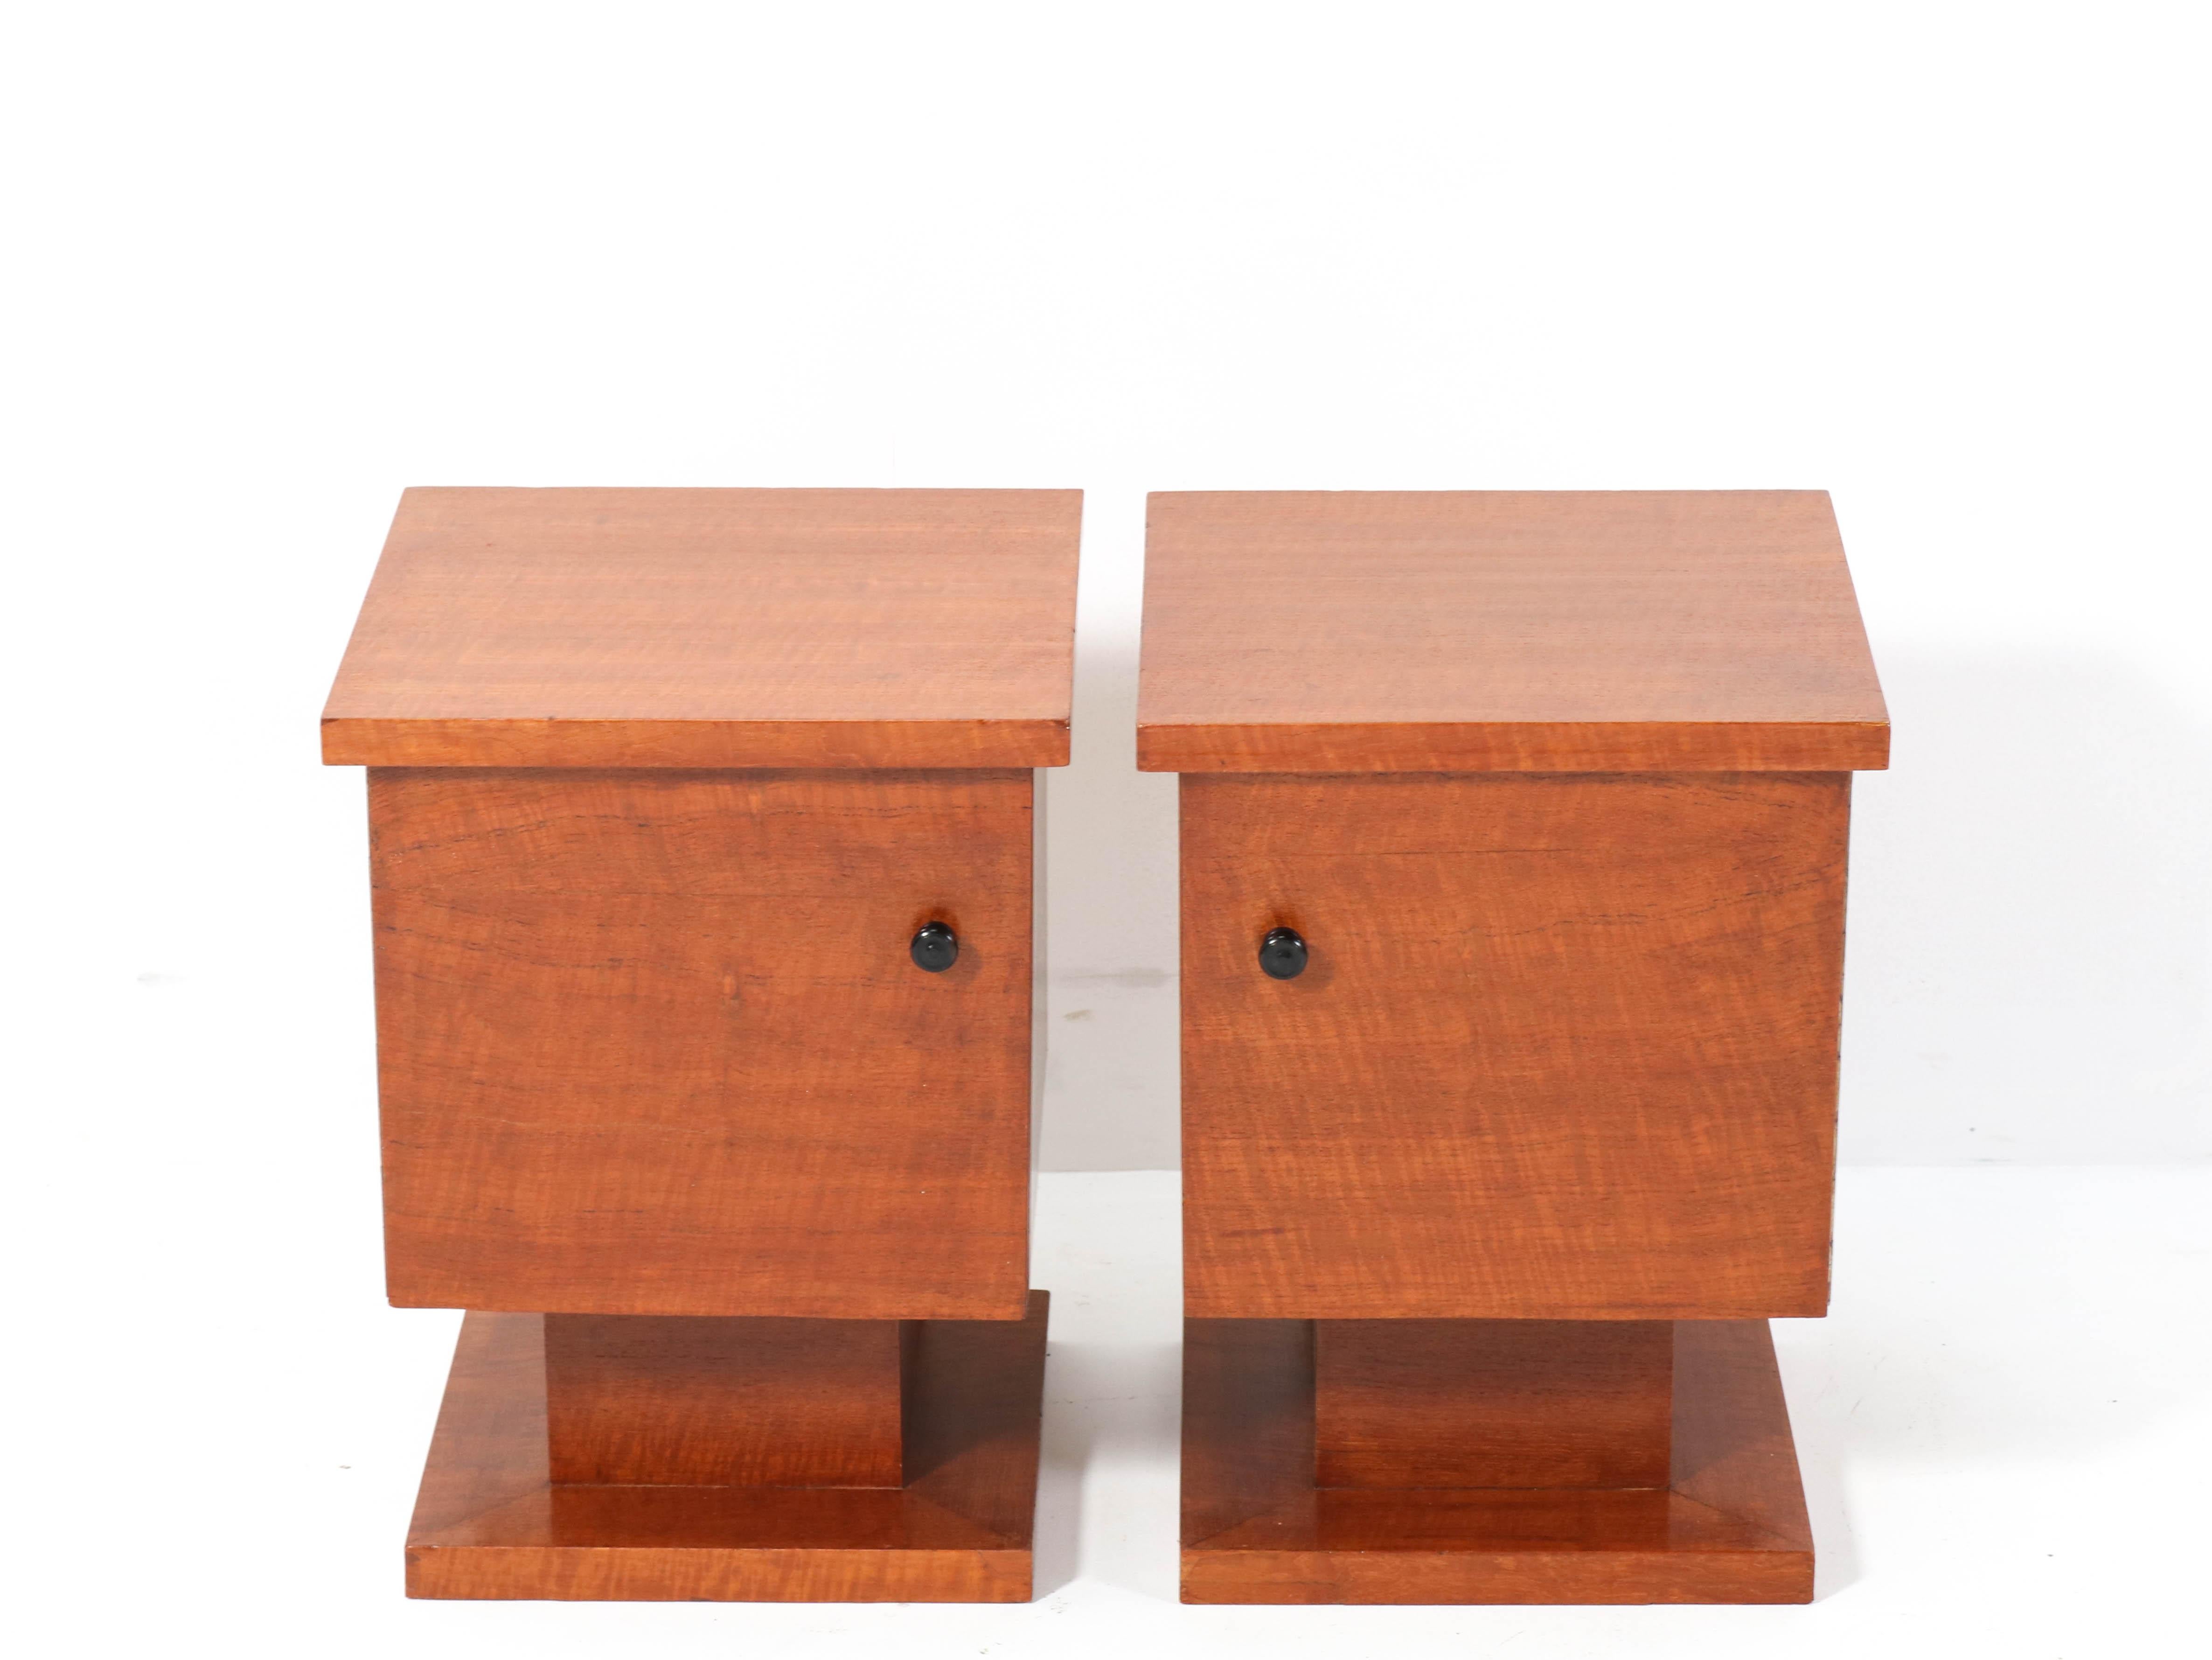 Wonderful pair of Mid-Century Modern nightstands or bedside tables.
Striking Dutch design from the 1950s.
Solid teak and original teak veneer with original ebony knobs.
Marked with manufacturers stamp on the backside.
In very good refinished